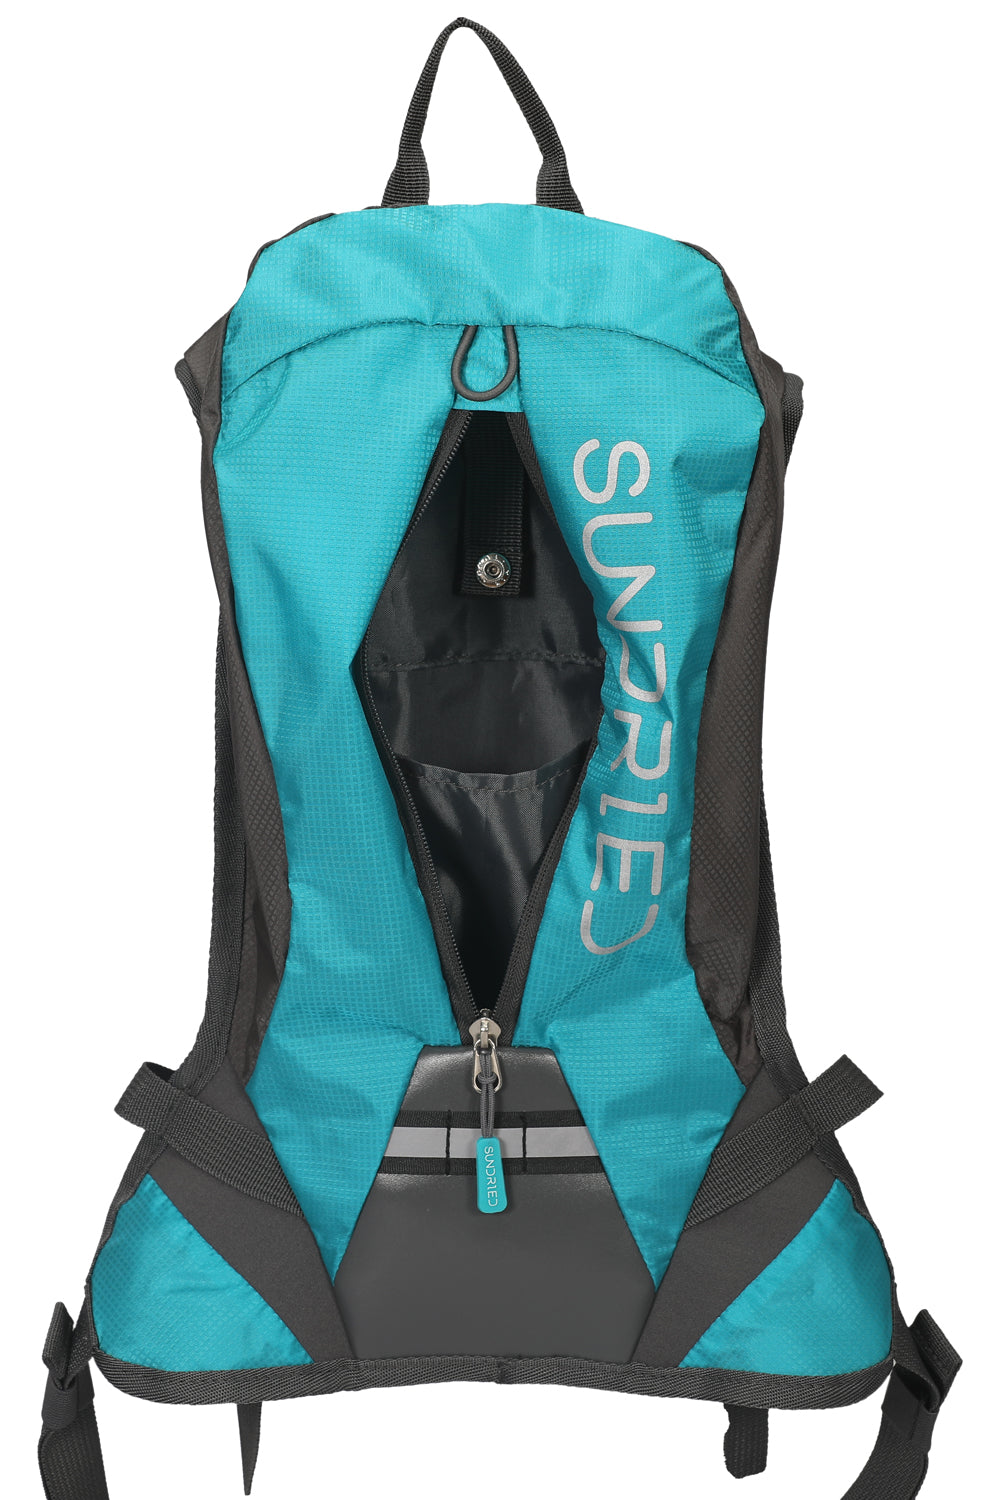 Sundried Hydration Backpack Pro Bags SD0405 Activewear